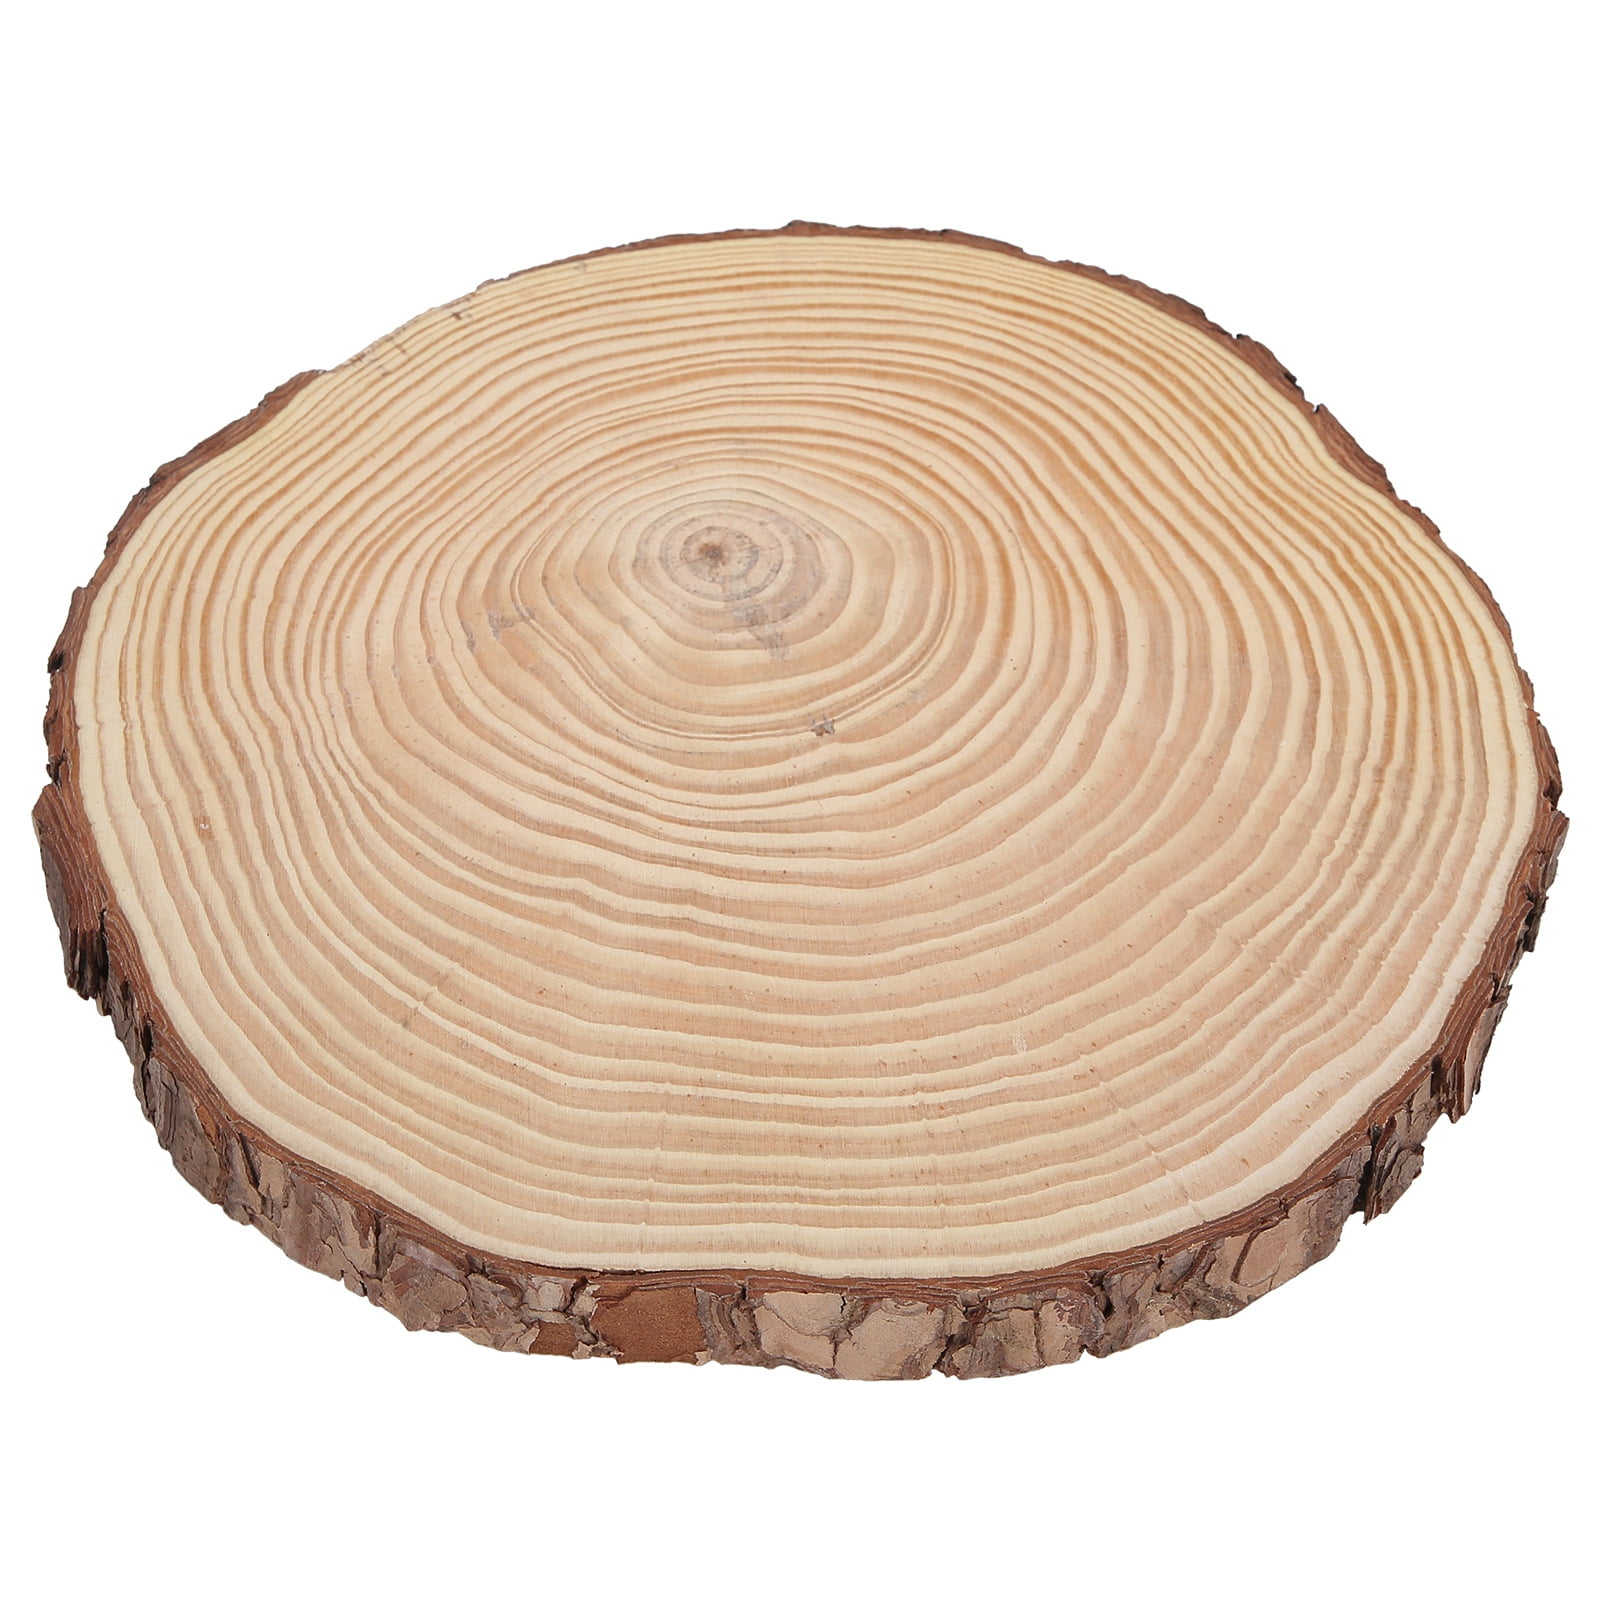 Pllieay 8 PCS 10-11 Inch Large Wood Slices, Wooden Cake Stand with 8 PCS  Cards and 8 PCS Wood Table Number Card Holders for Table Centerpiece, Wood